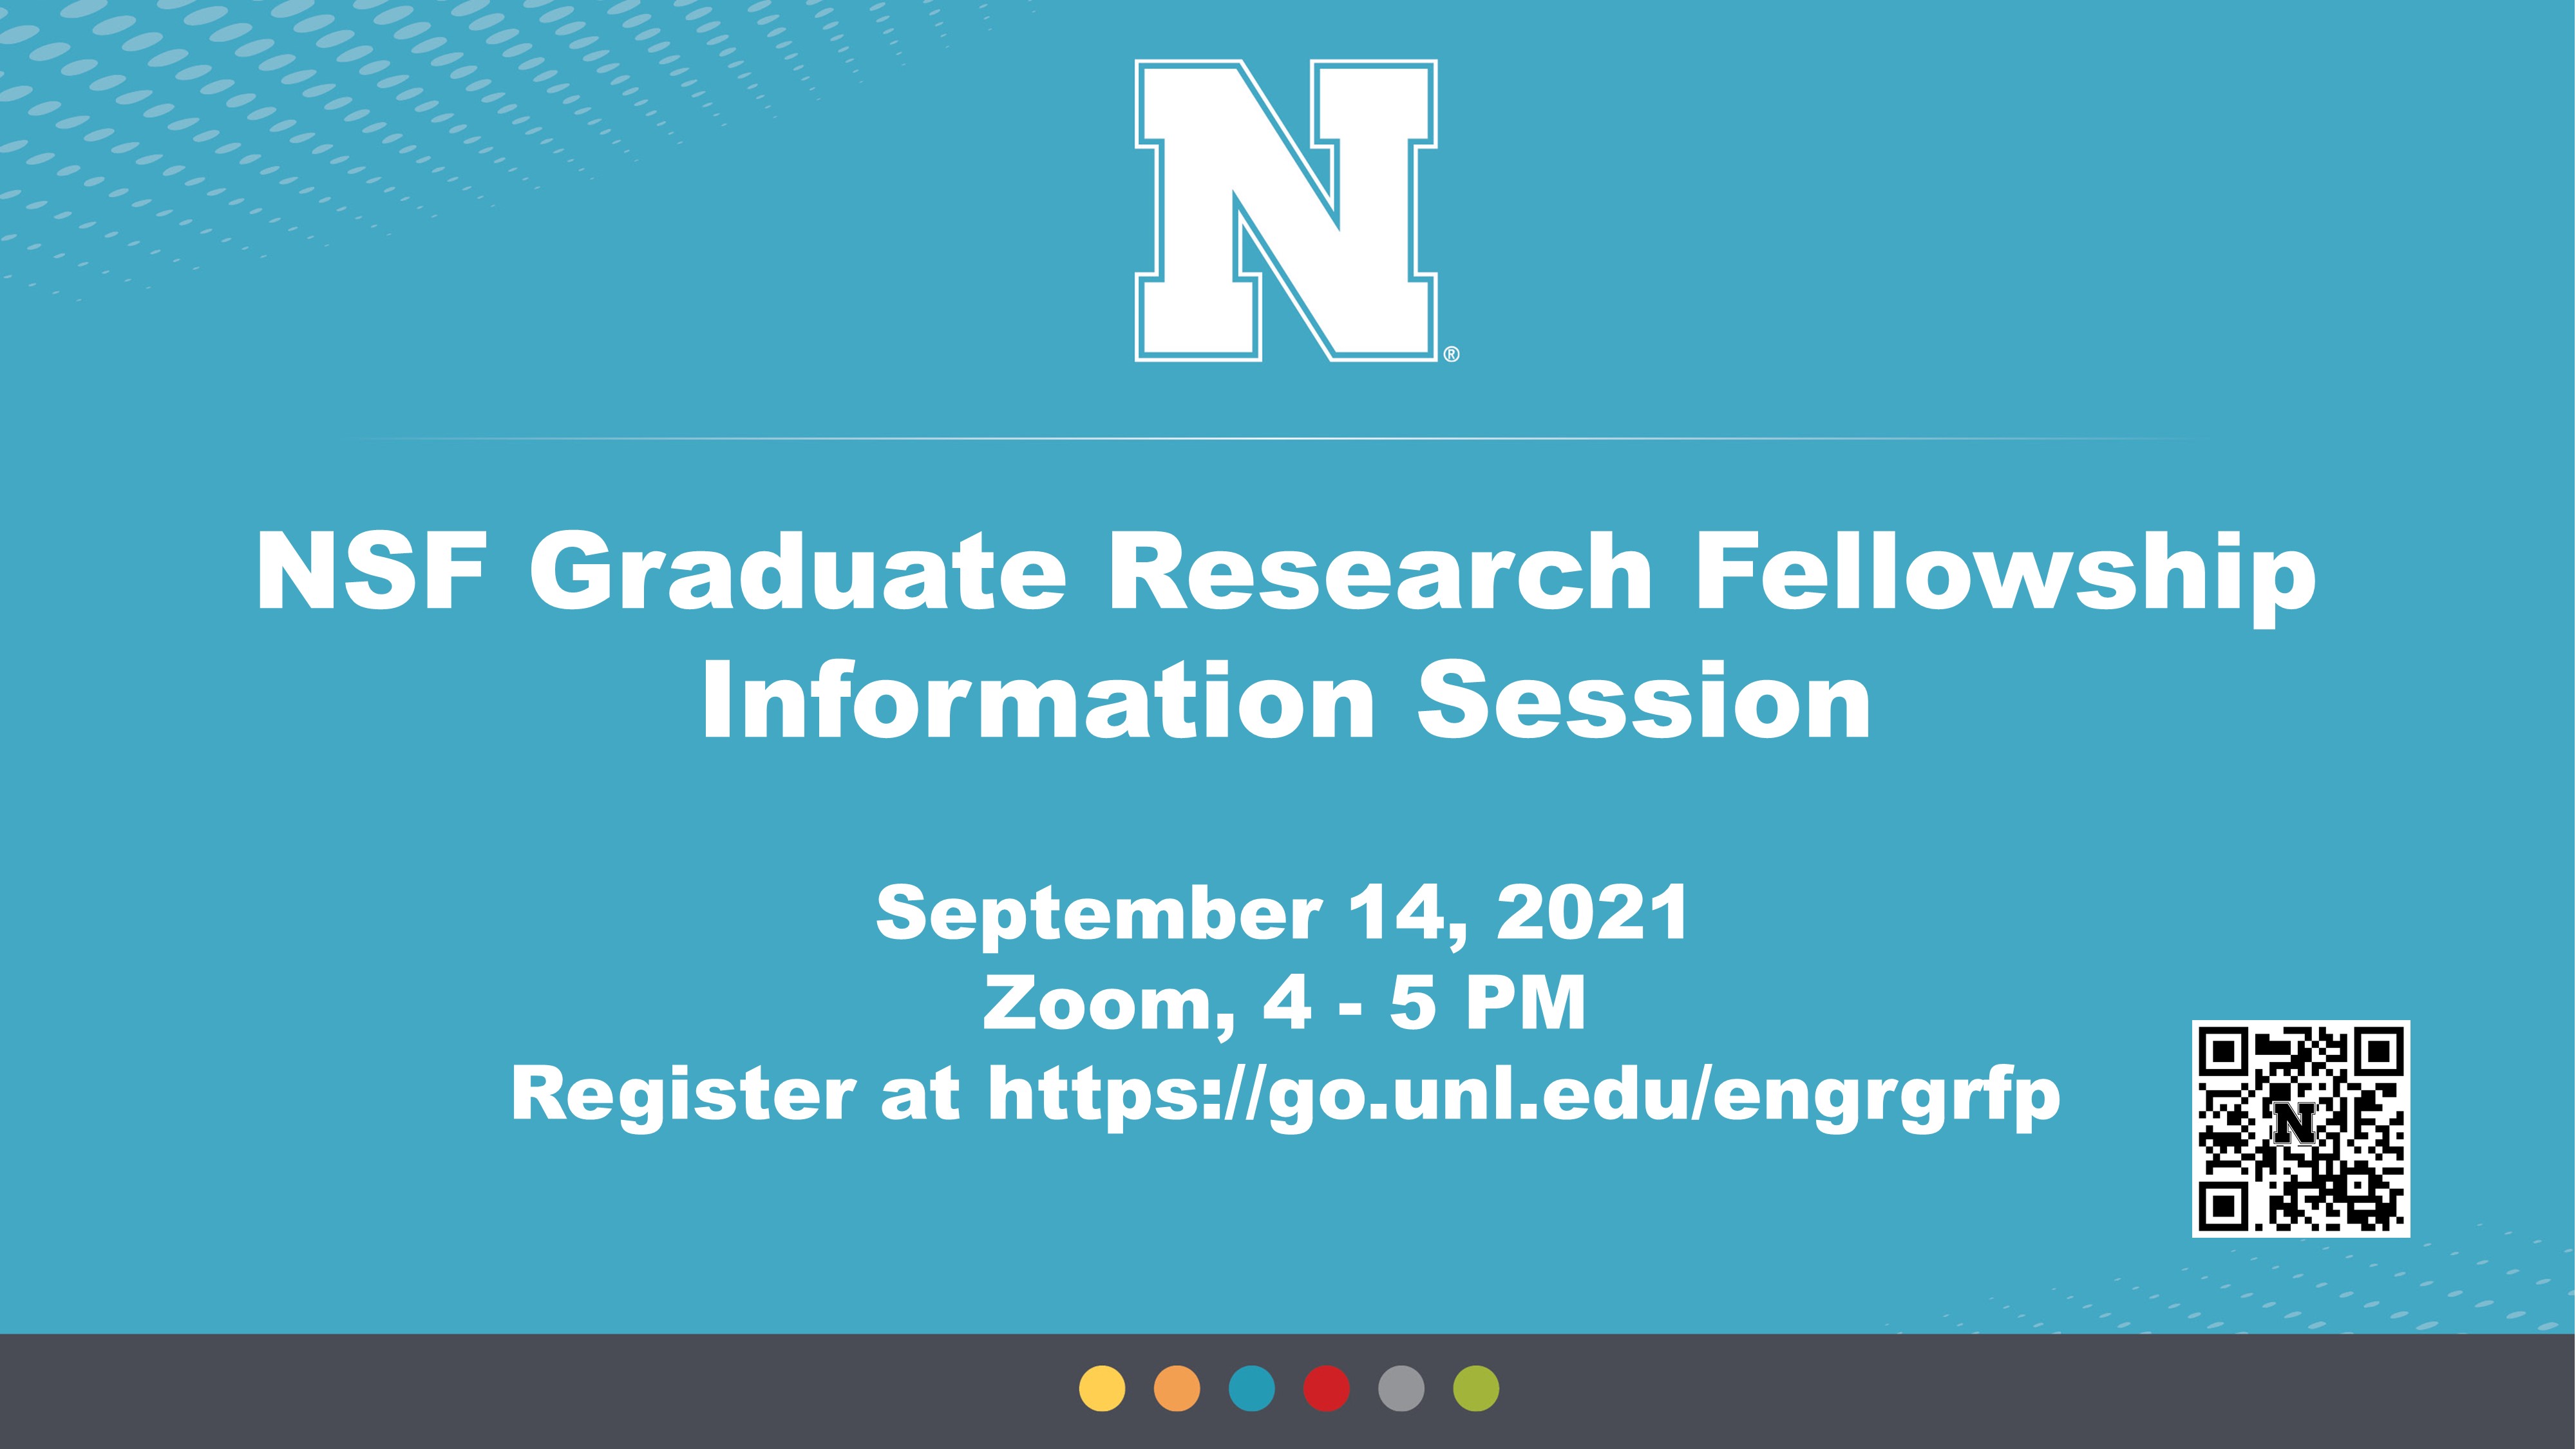 nsf graduate research fellowship acceptance rate